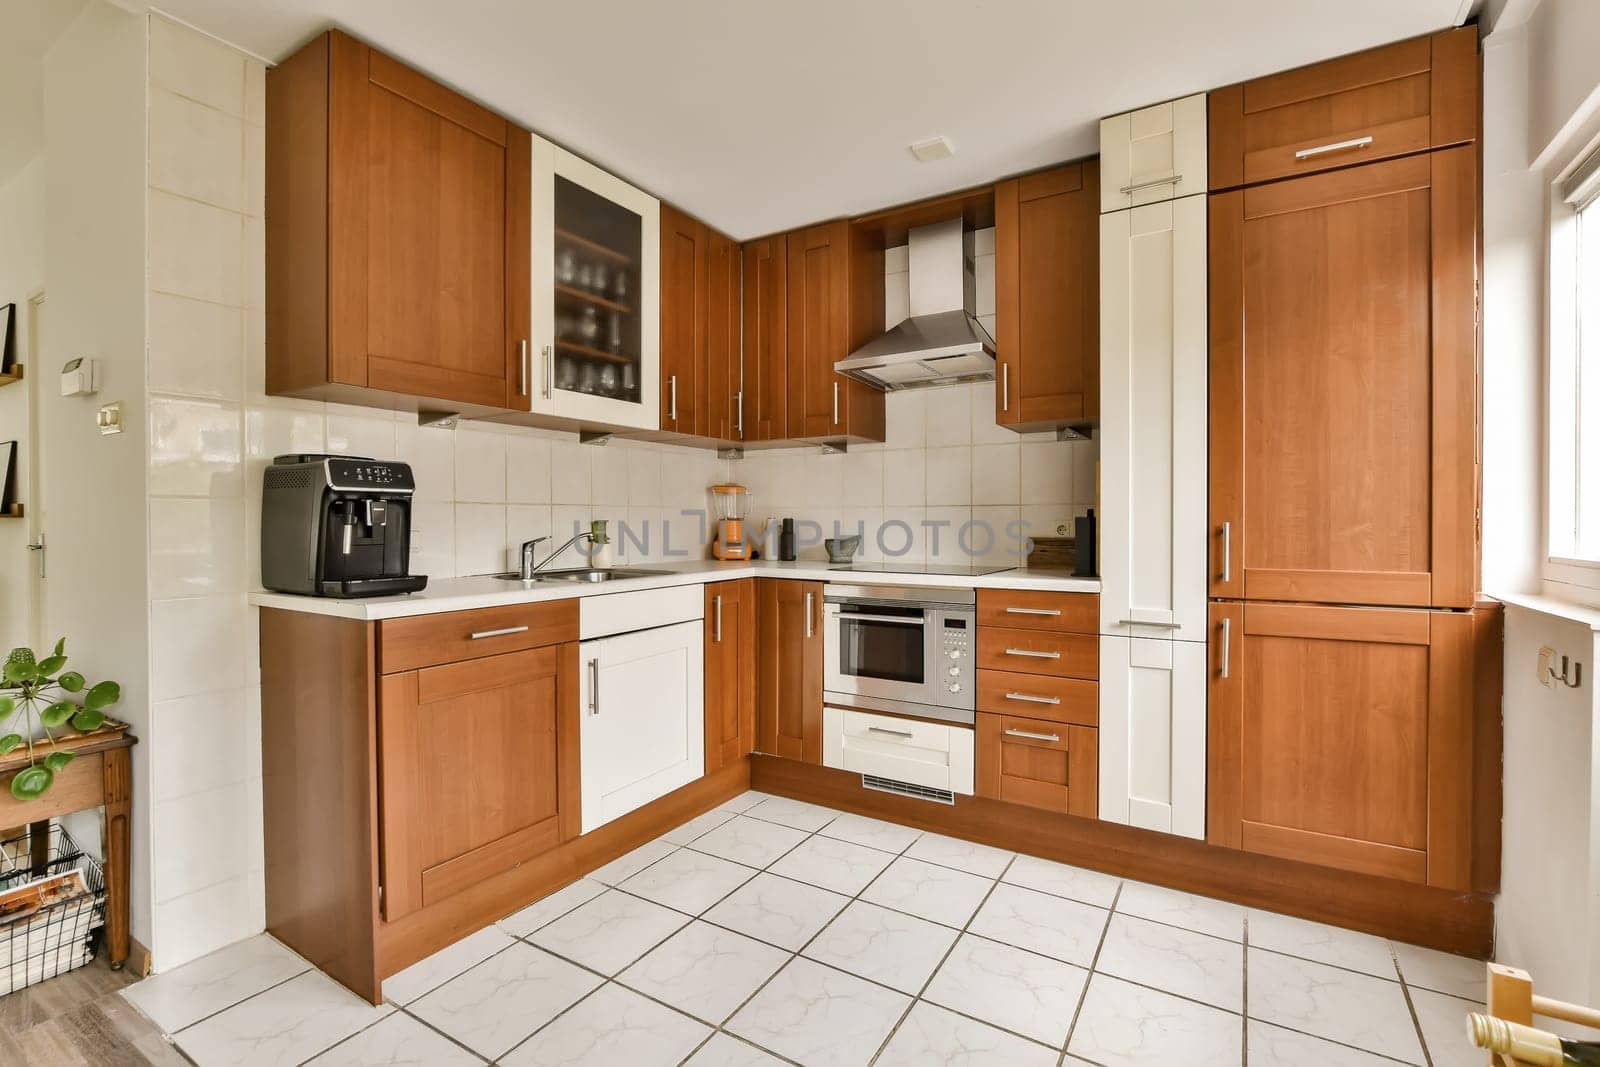 a kitchen with wood cabinets and white tiles on the floor in front of the oven, microwave and dishwasher